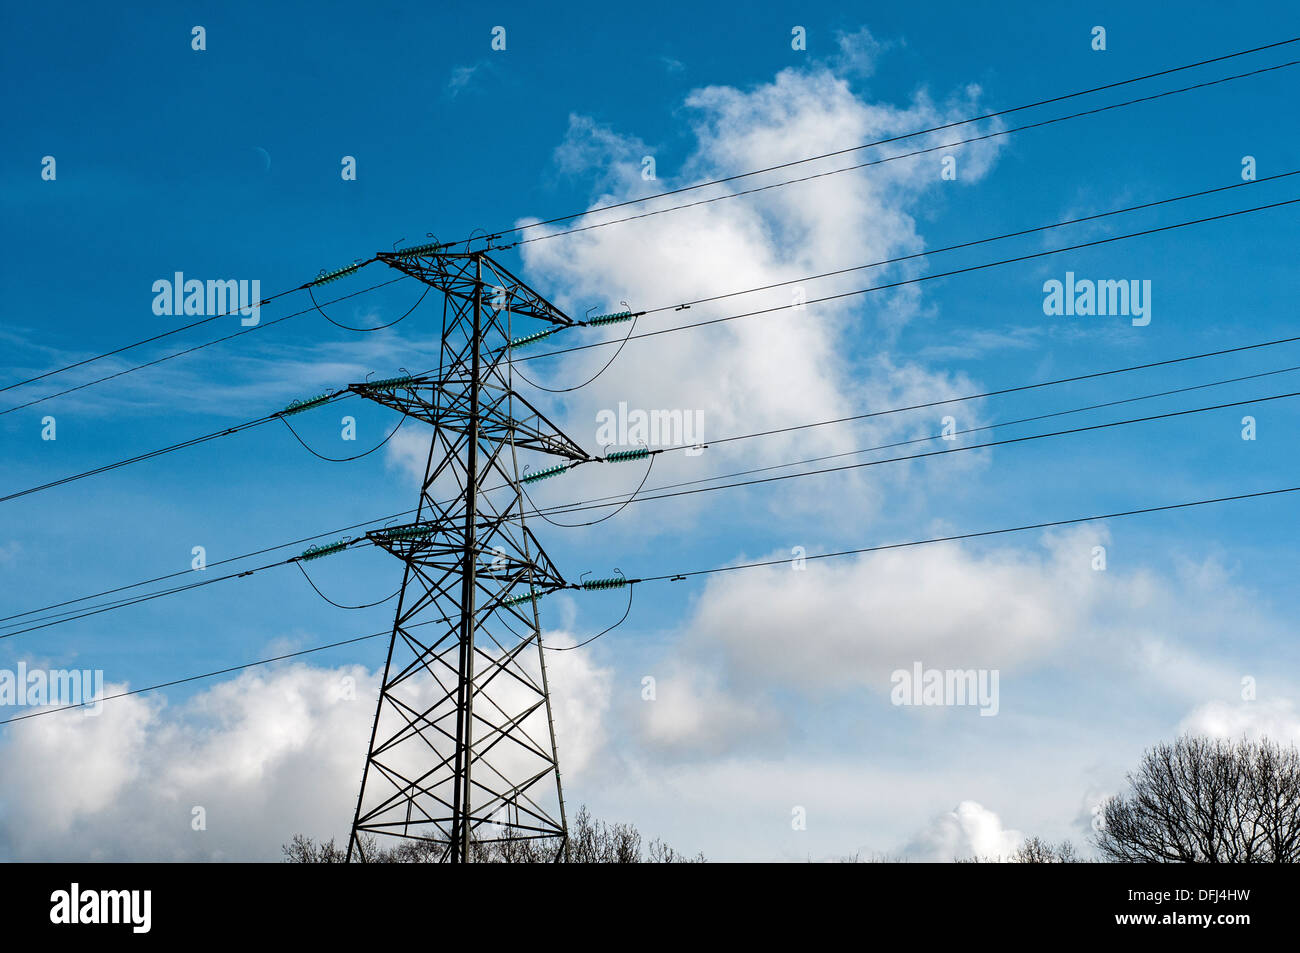 Electricity Transmission Power Lines and Tower crossing the countryside Stock Photo